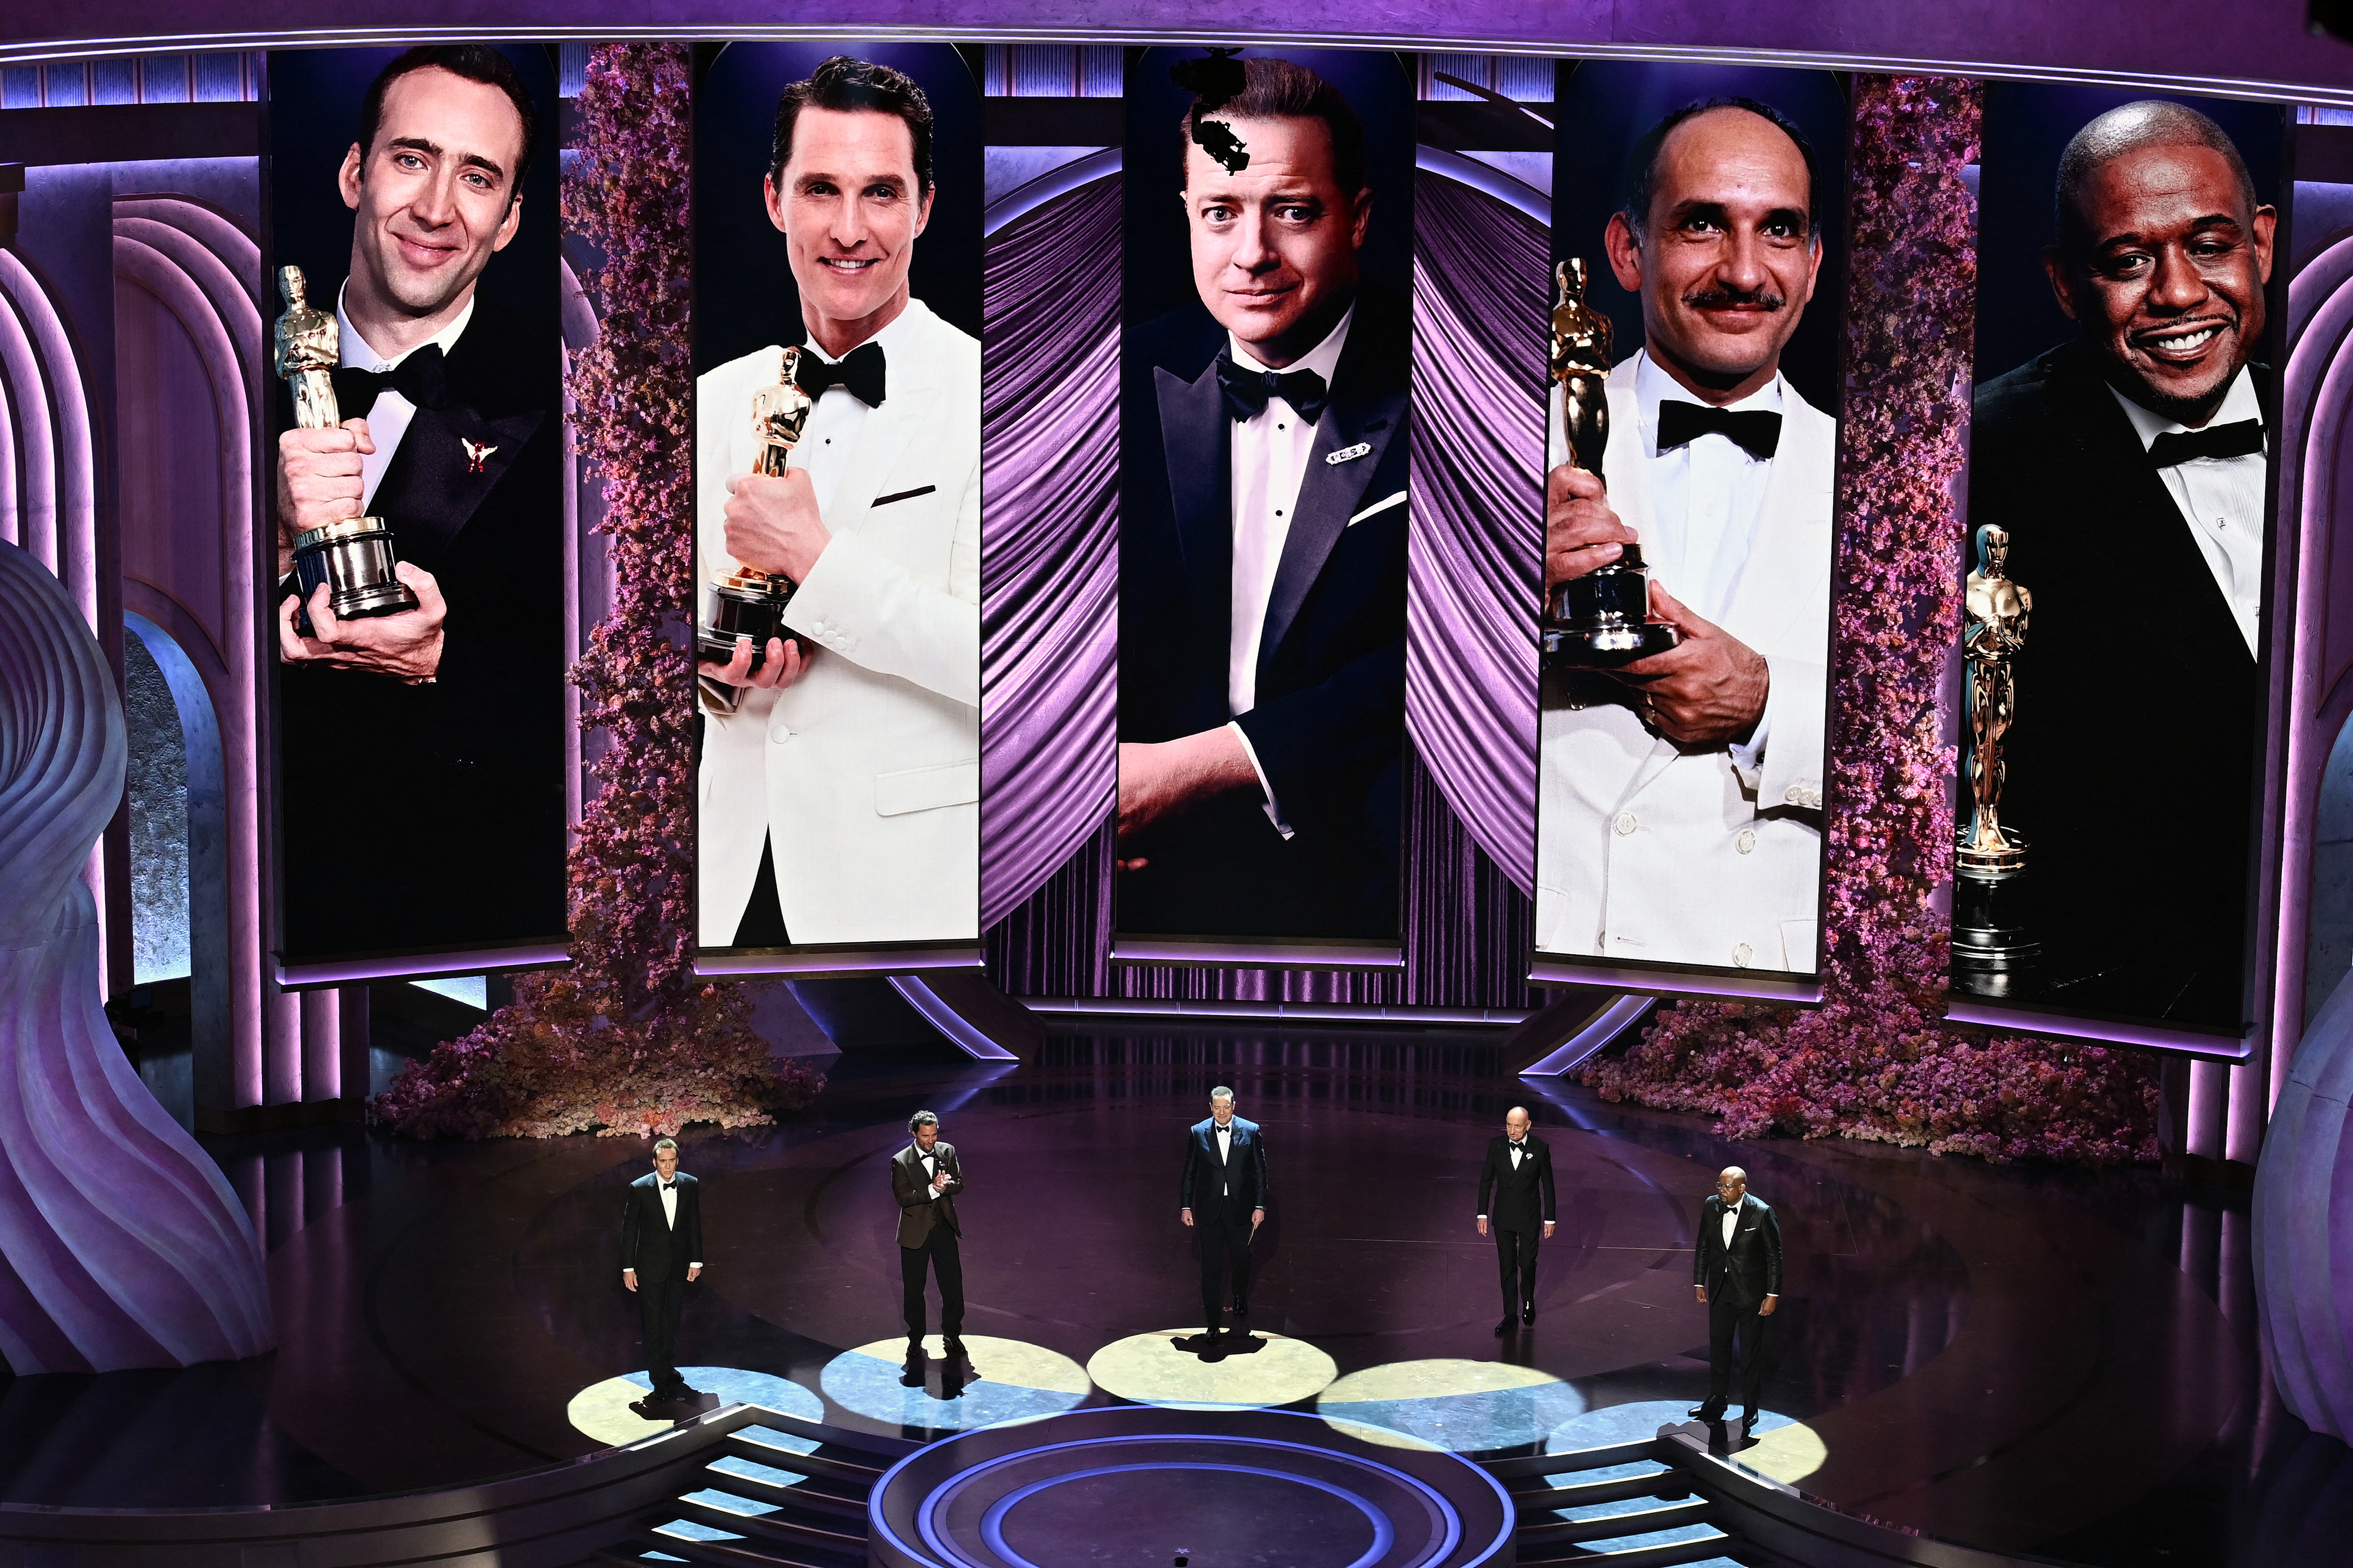 Five actors on stage at an awards show, each holding a trophy, with large portraits of them in the background